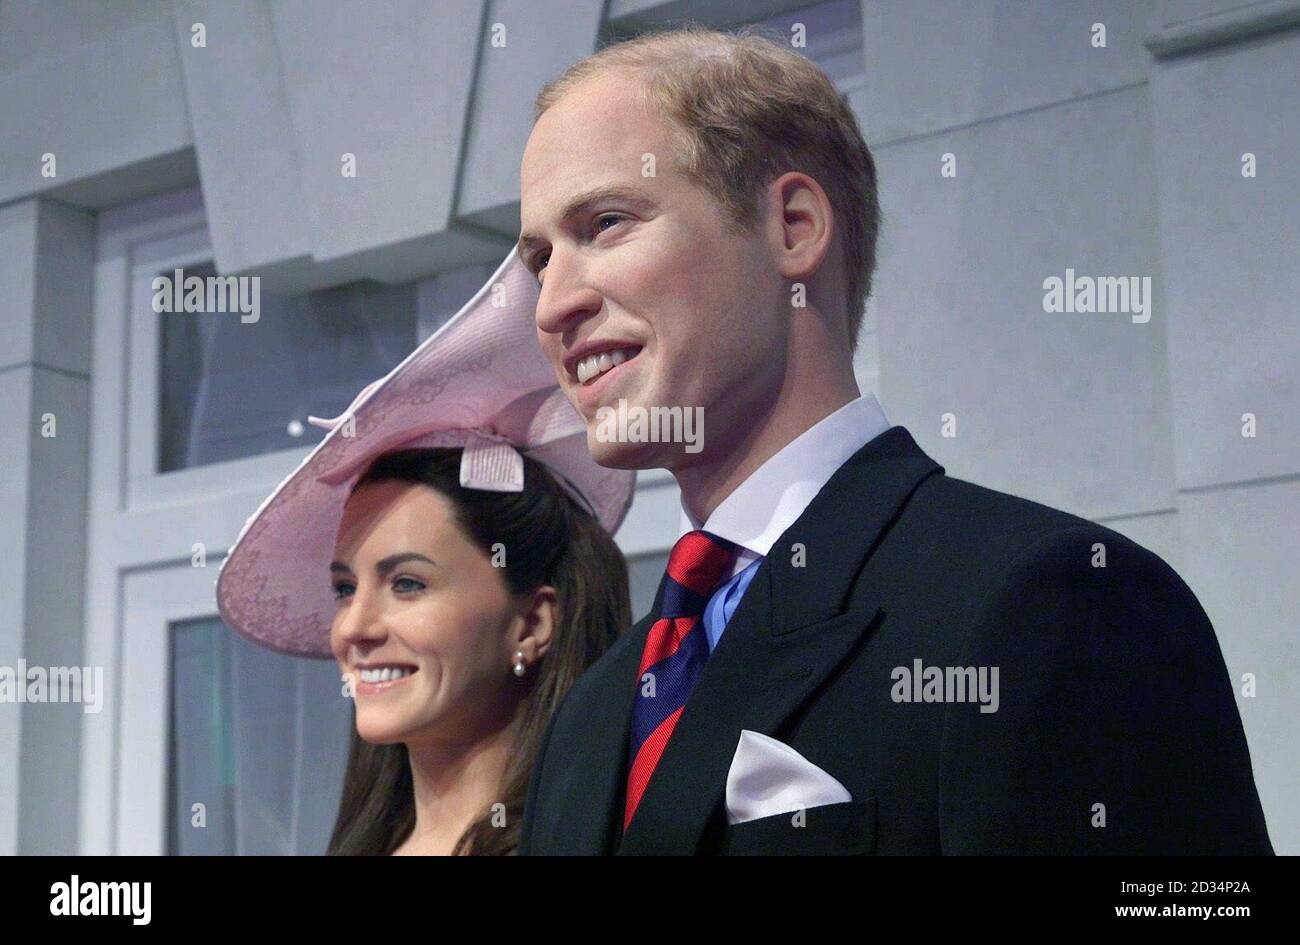 Wax figures of the Duke and Duchess of Cambridge standing on a newly-unveiled set recreating the Buckingham Palace balcony at Madame Tussauds in London. Visitors to the attraction will be able to step on to the balcony and pose with the royal family. Stock Photo